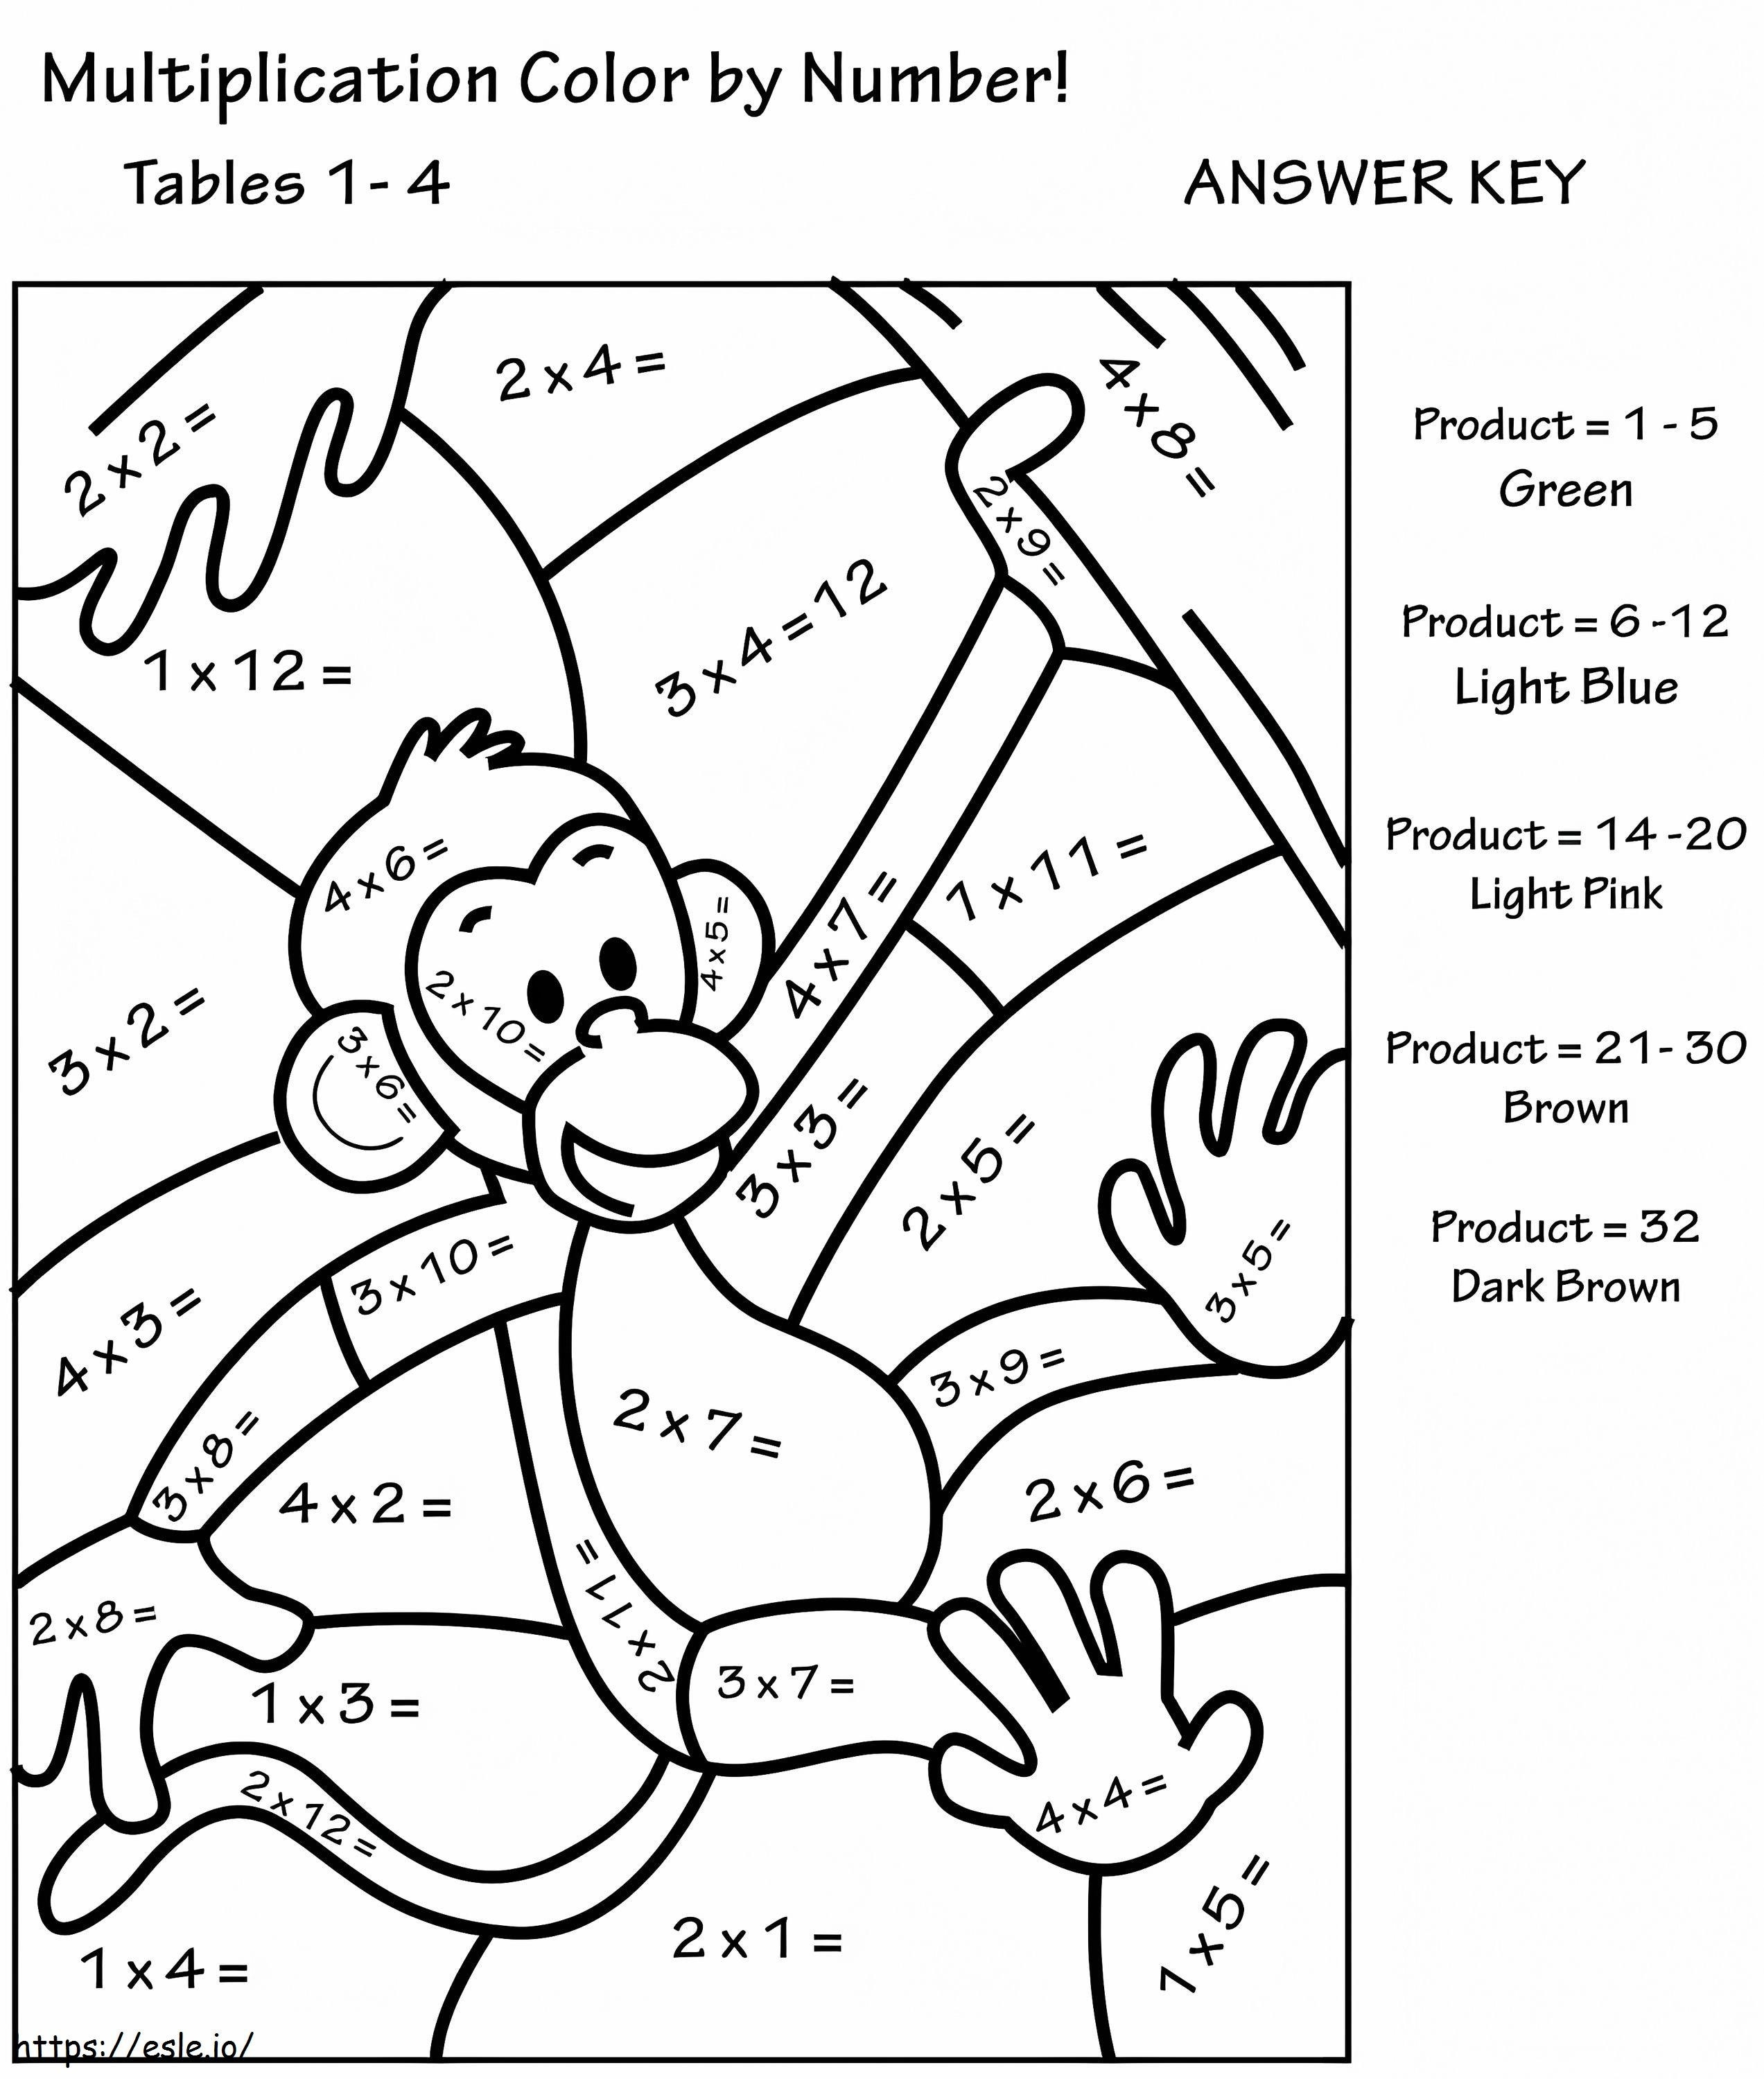 Monkey Multiplication Color By Number coloring page